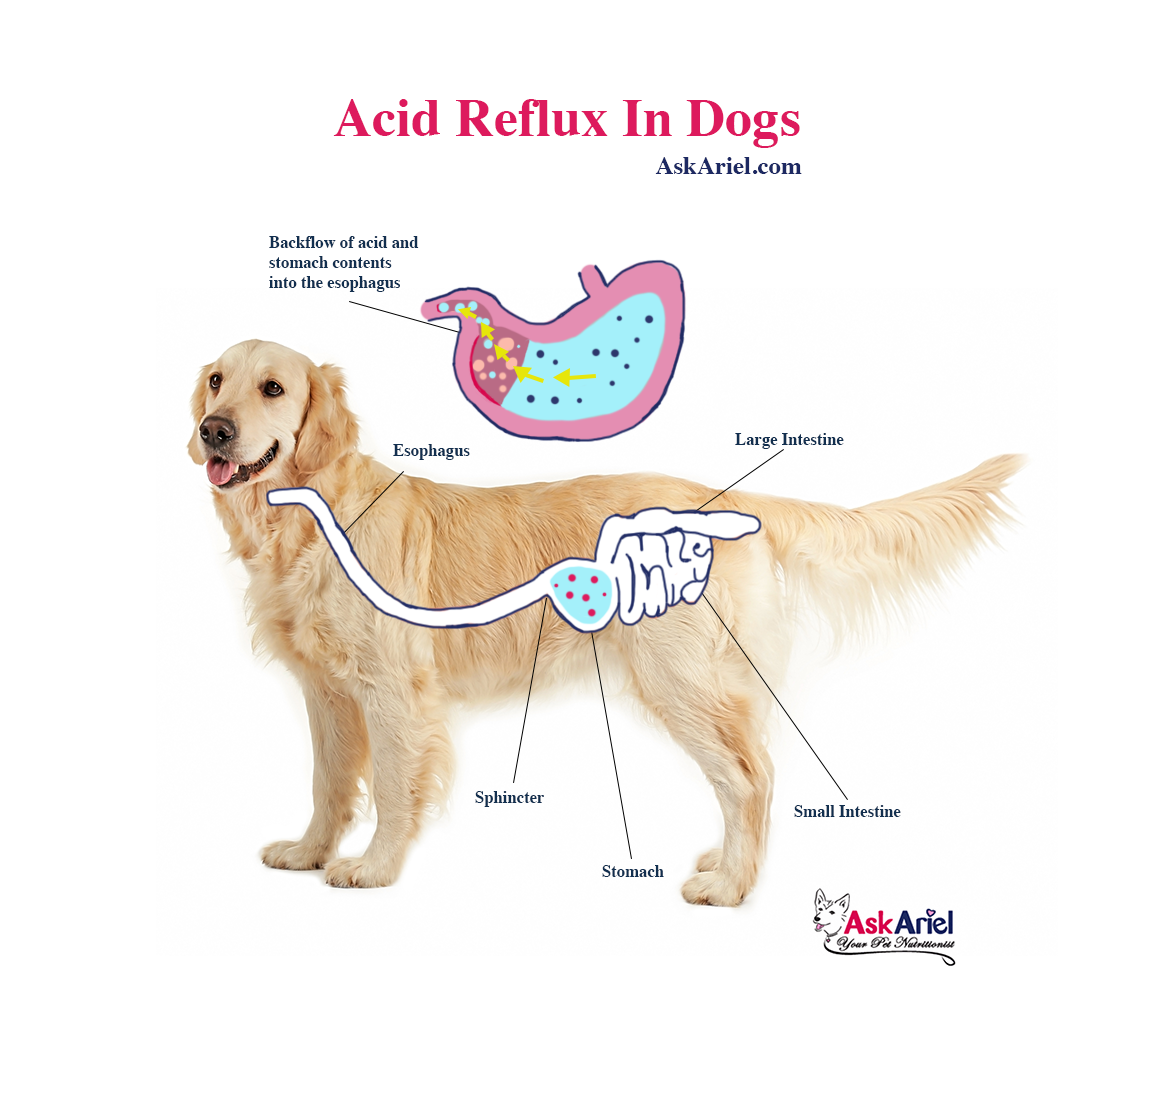 image for acid reflux in dogs